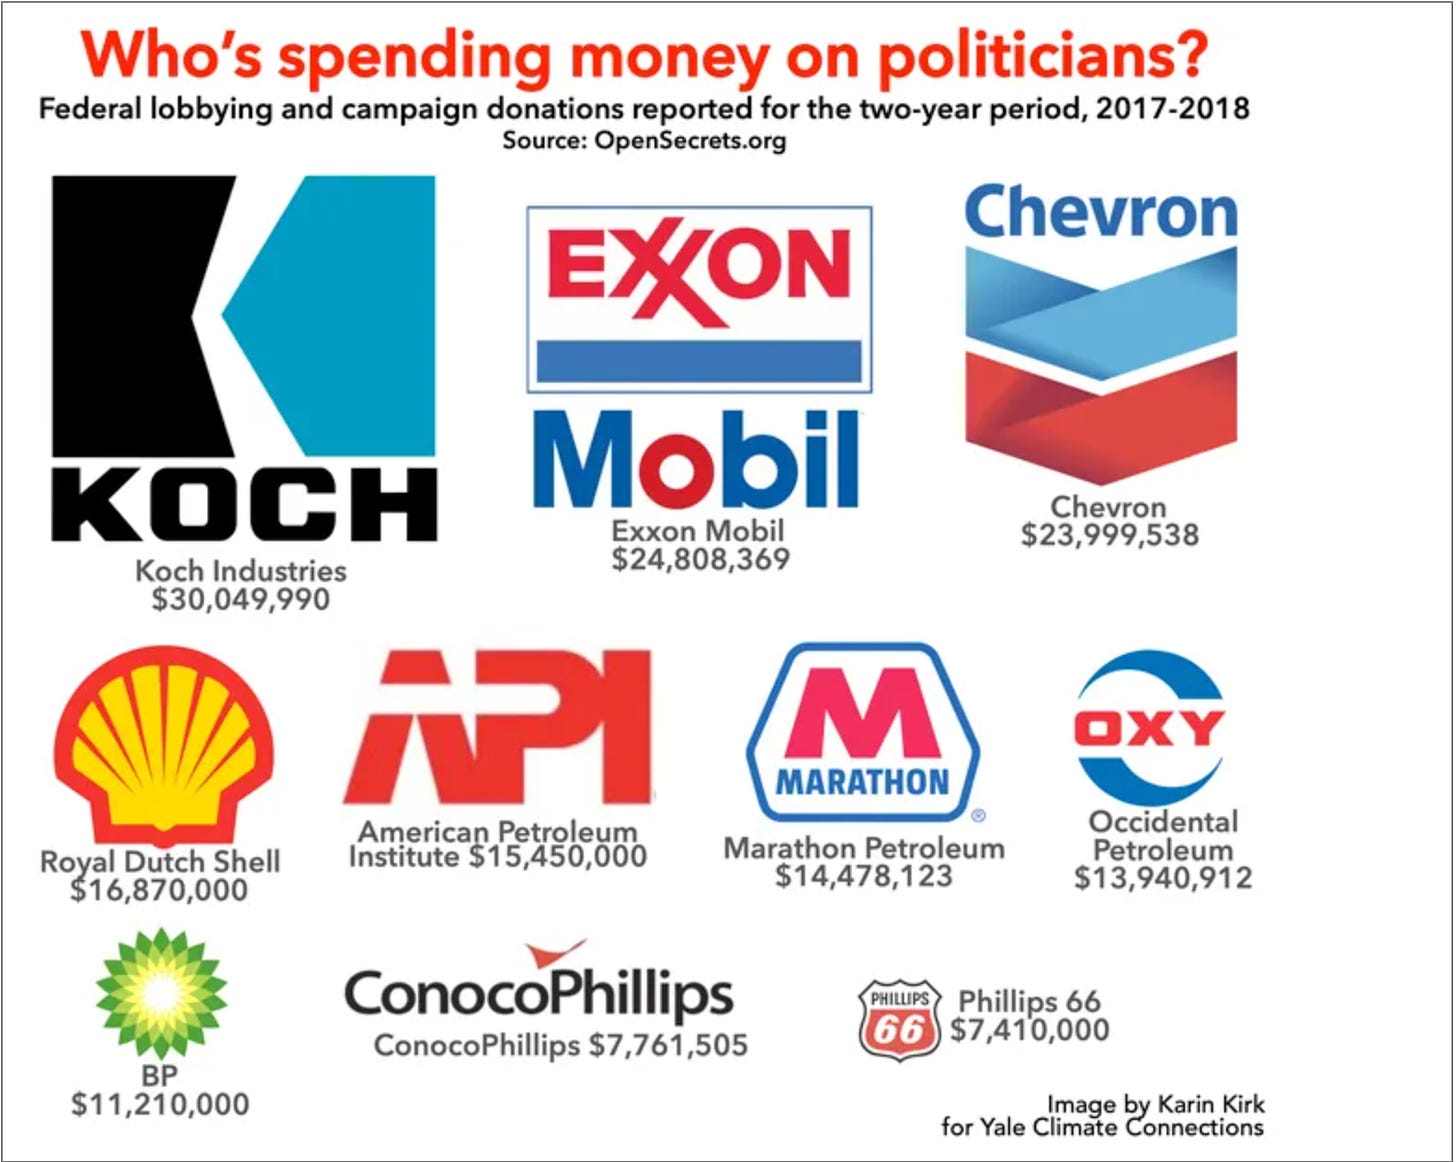 Screenshot from Yale Climate Connections showing spenders on lobbying and campaign donations by Koch Industries (the top spender at over $30 million, followed by Exxon Mobile at $24 million and Chevron at just under $24 million.) 